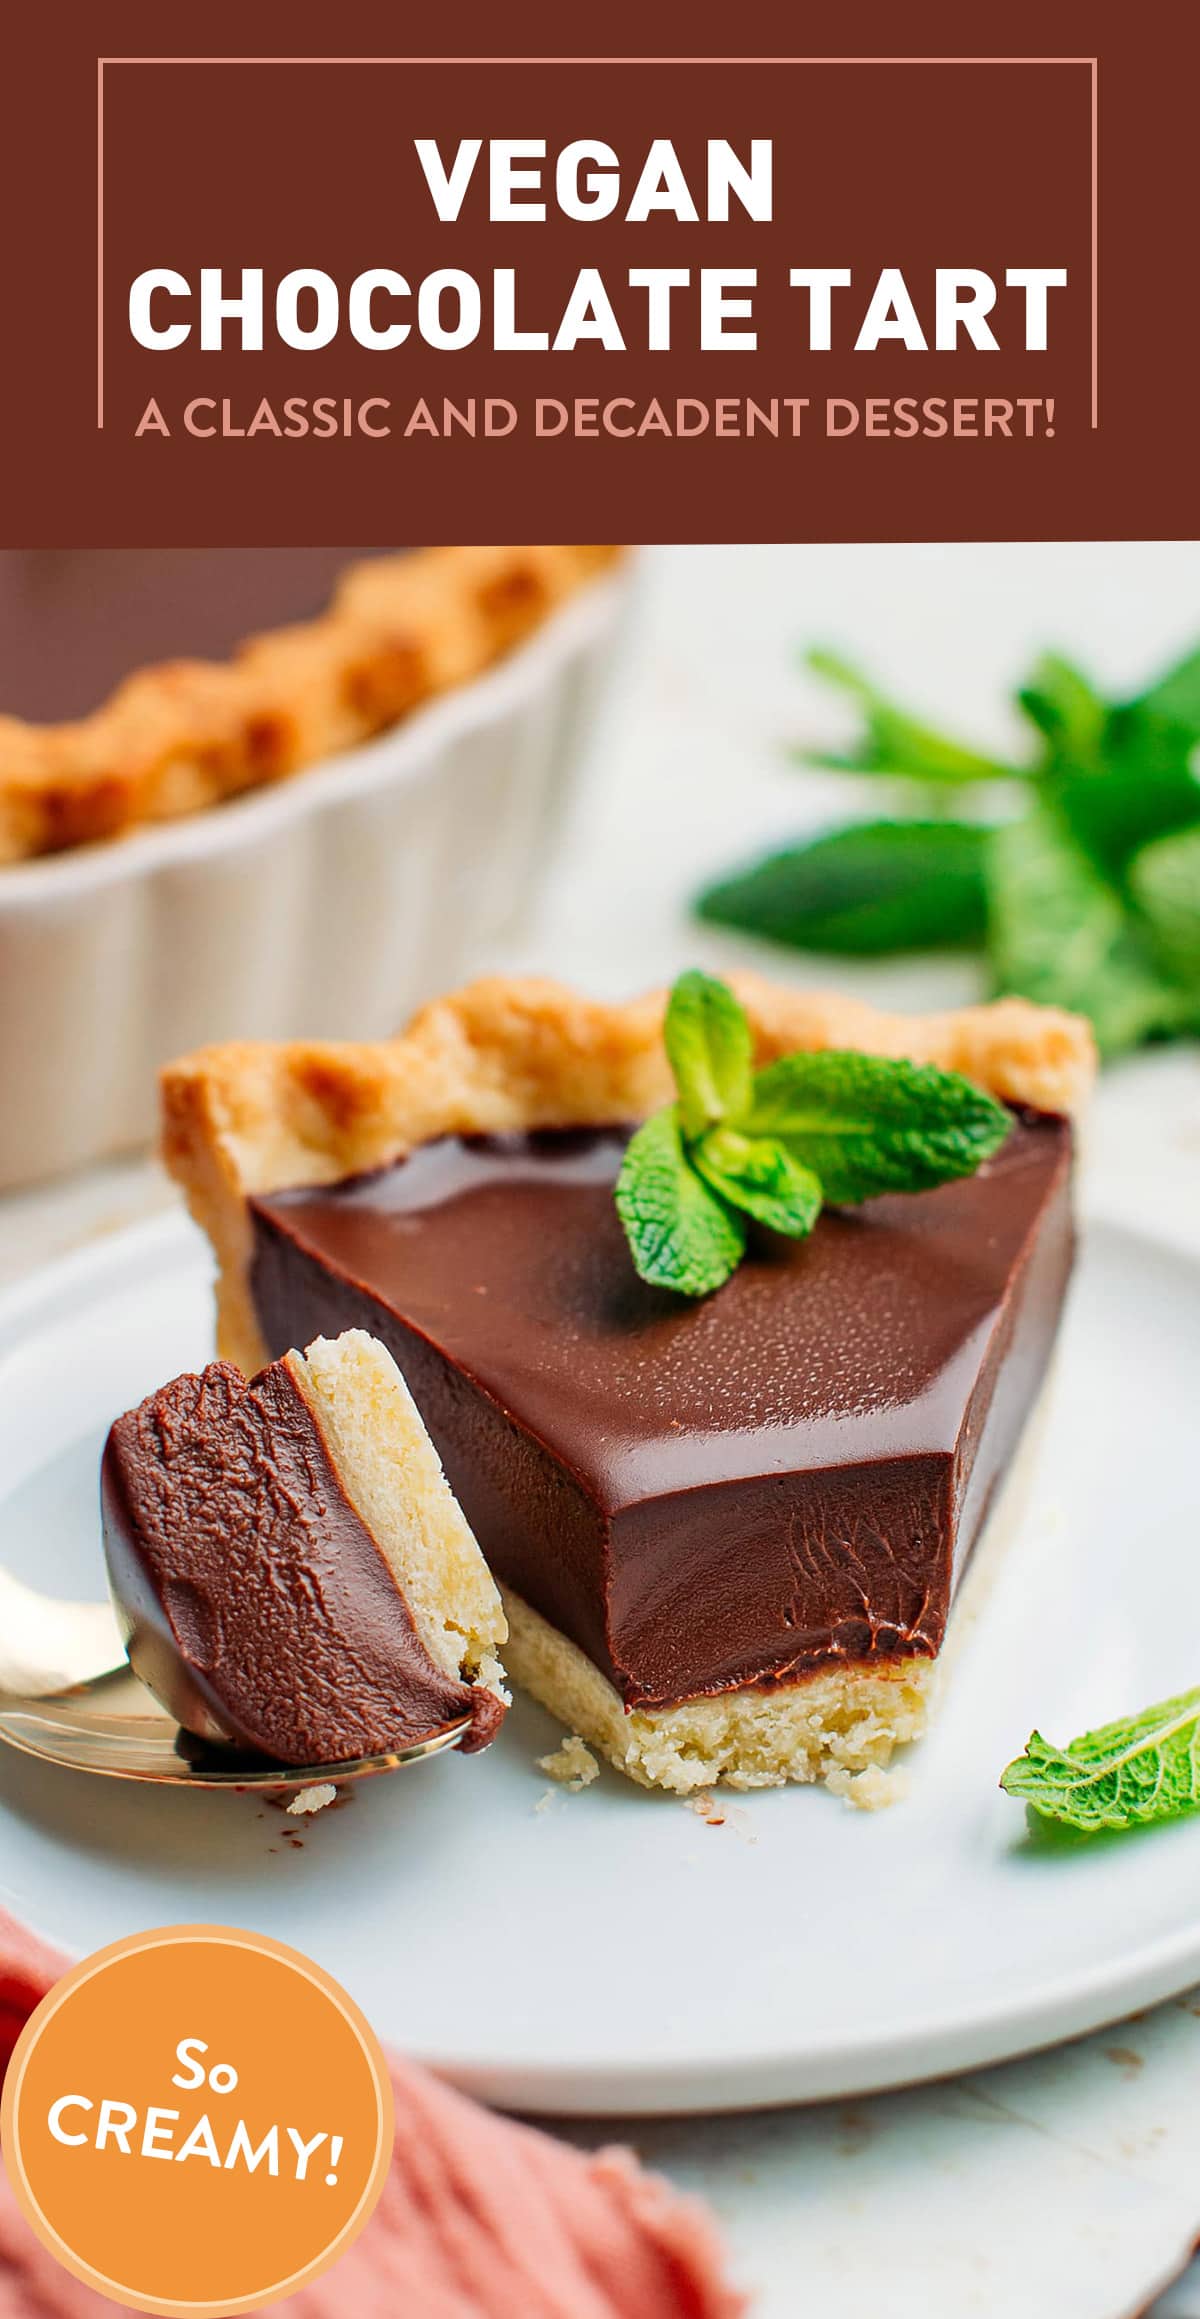 This vegan chocolate tart is ultra-creamy, rich, and packed with an intense chocolate flavor! Prepared with just a handful of ingredients in 30 minutes, it's a classic and decadent dessert that will surely excite your tastebuds!